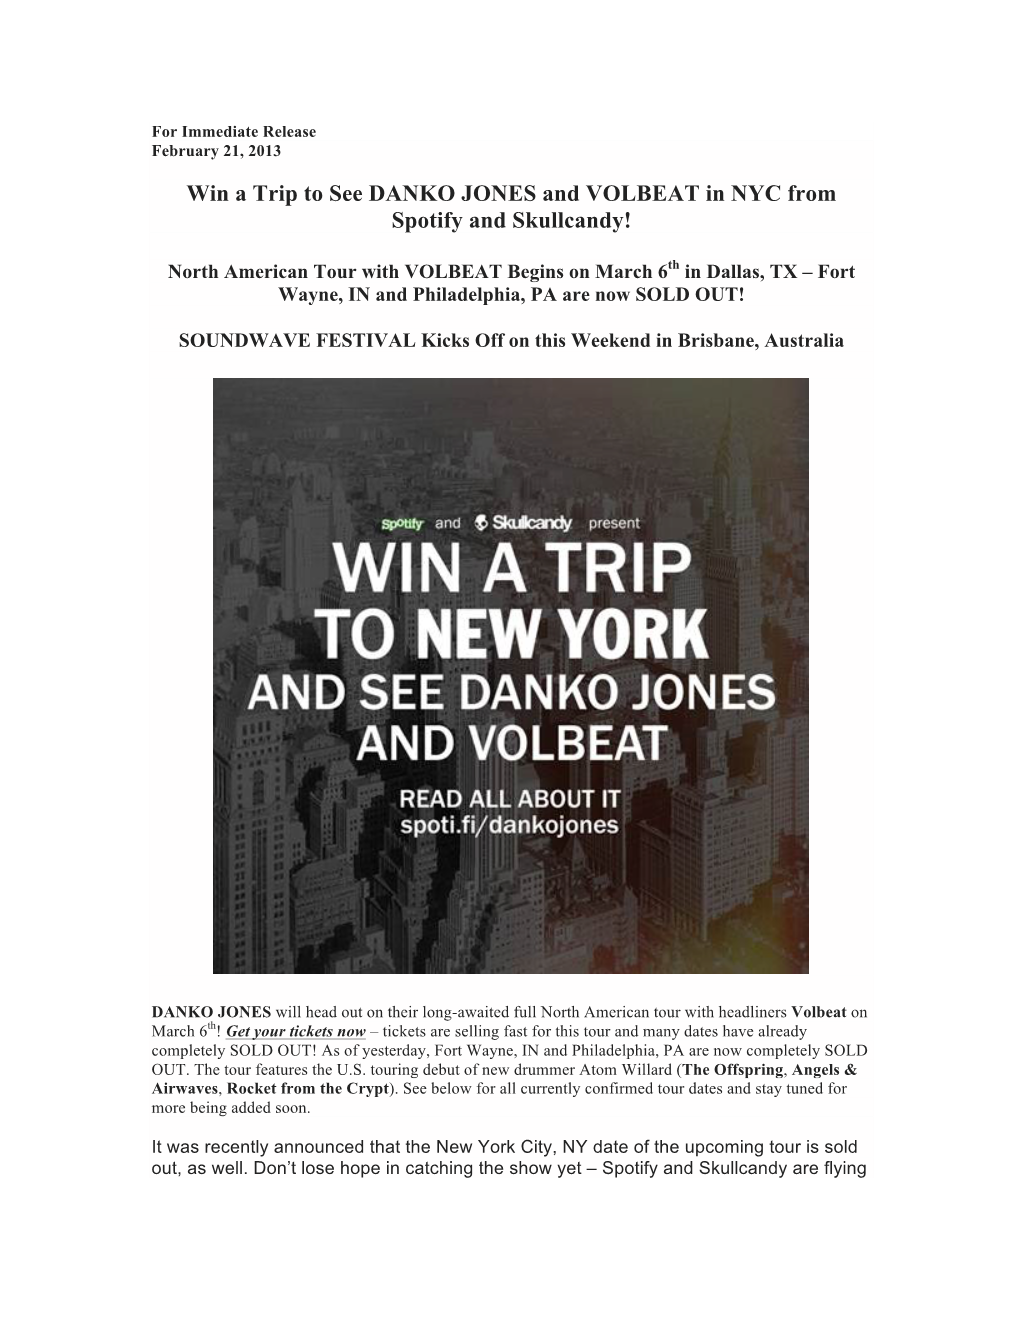 Win a Trip to See DANKO JONES and VOLBEAT in NYC from Spotify and Skullcandy!